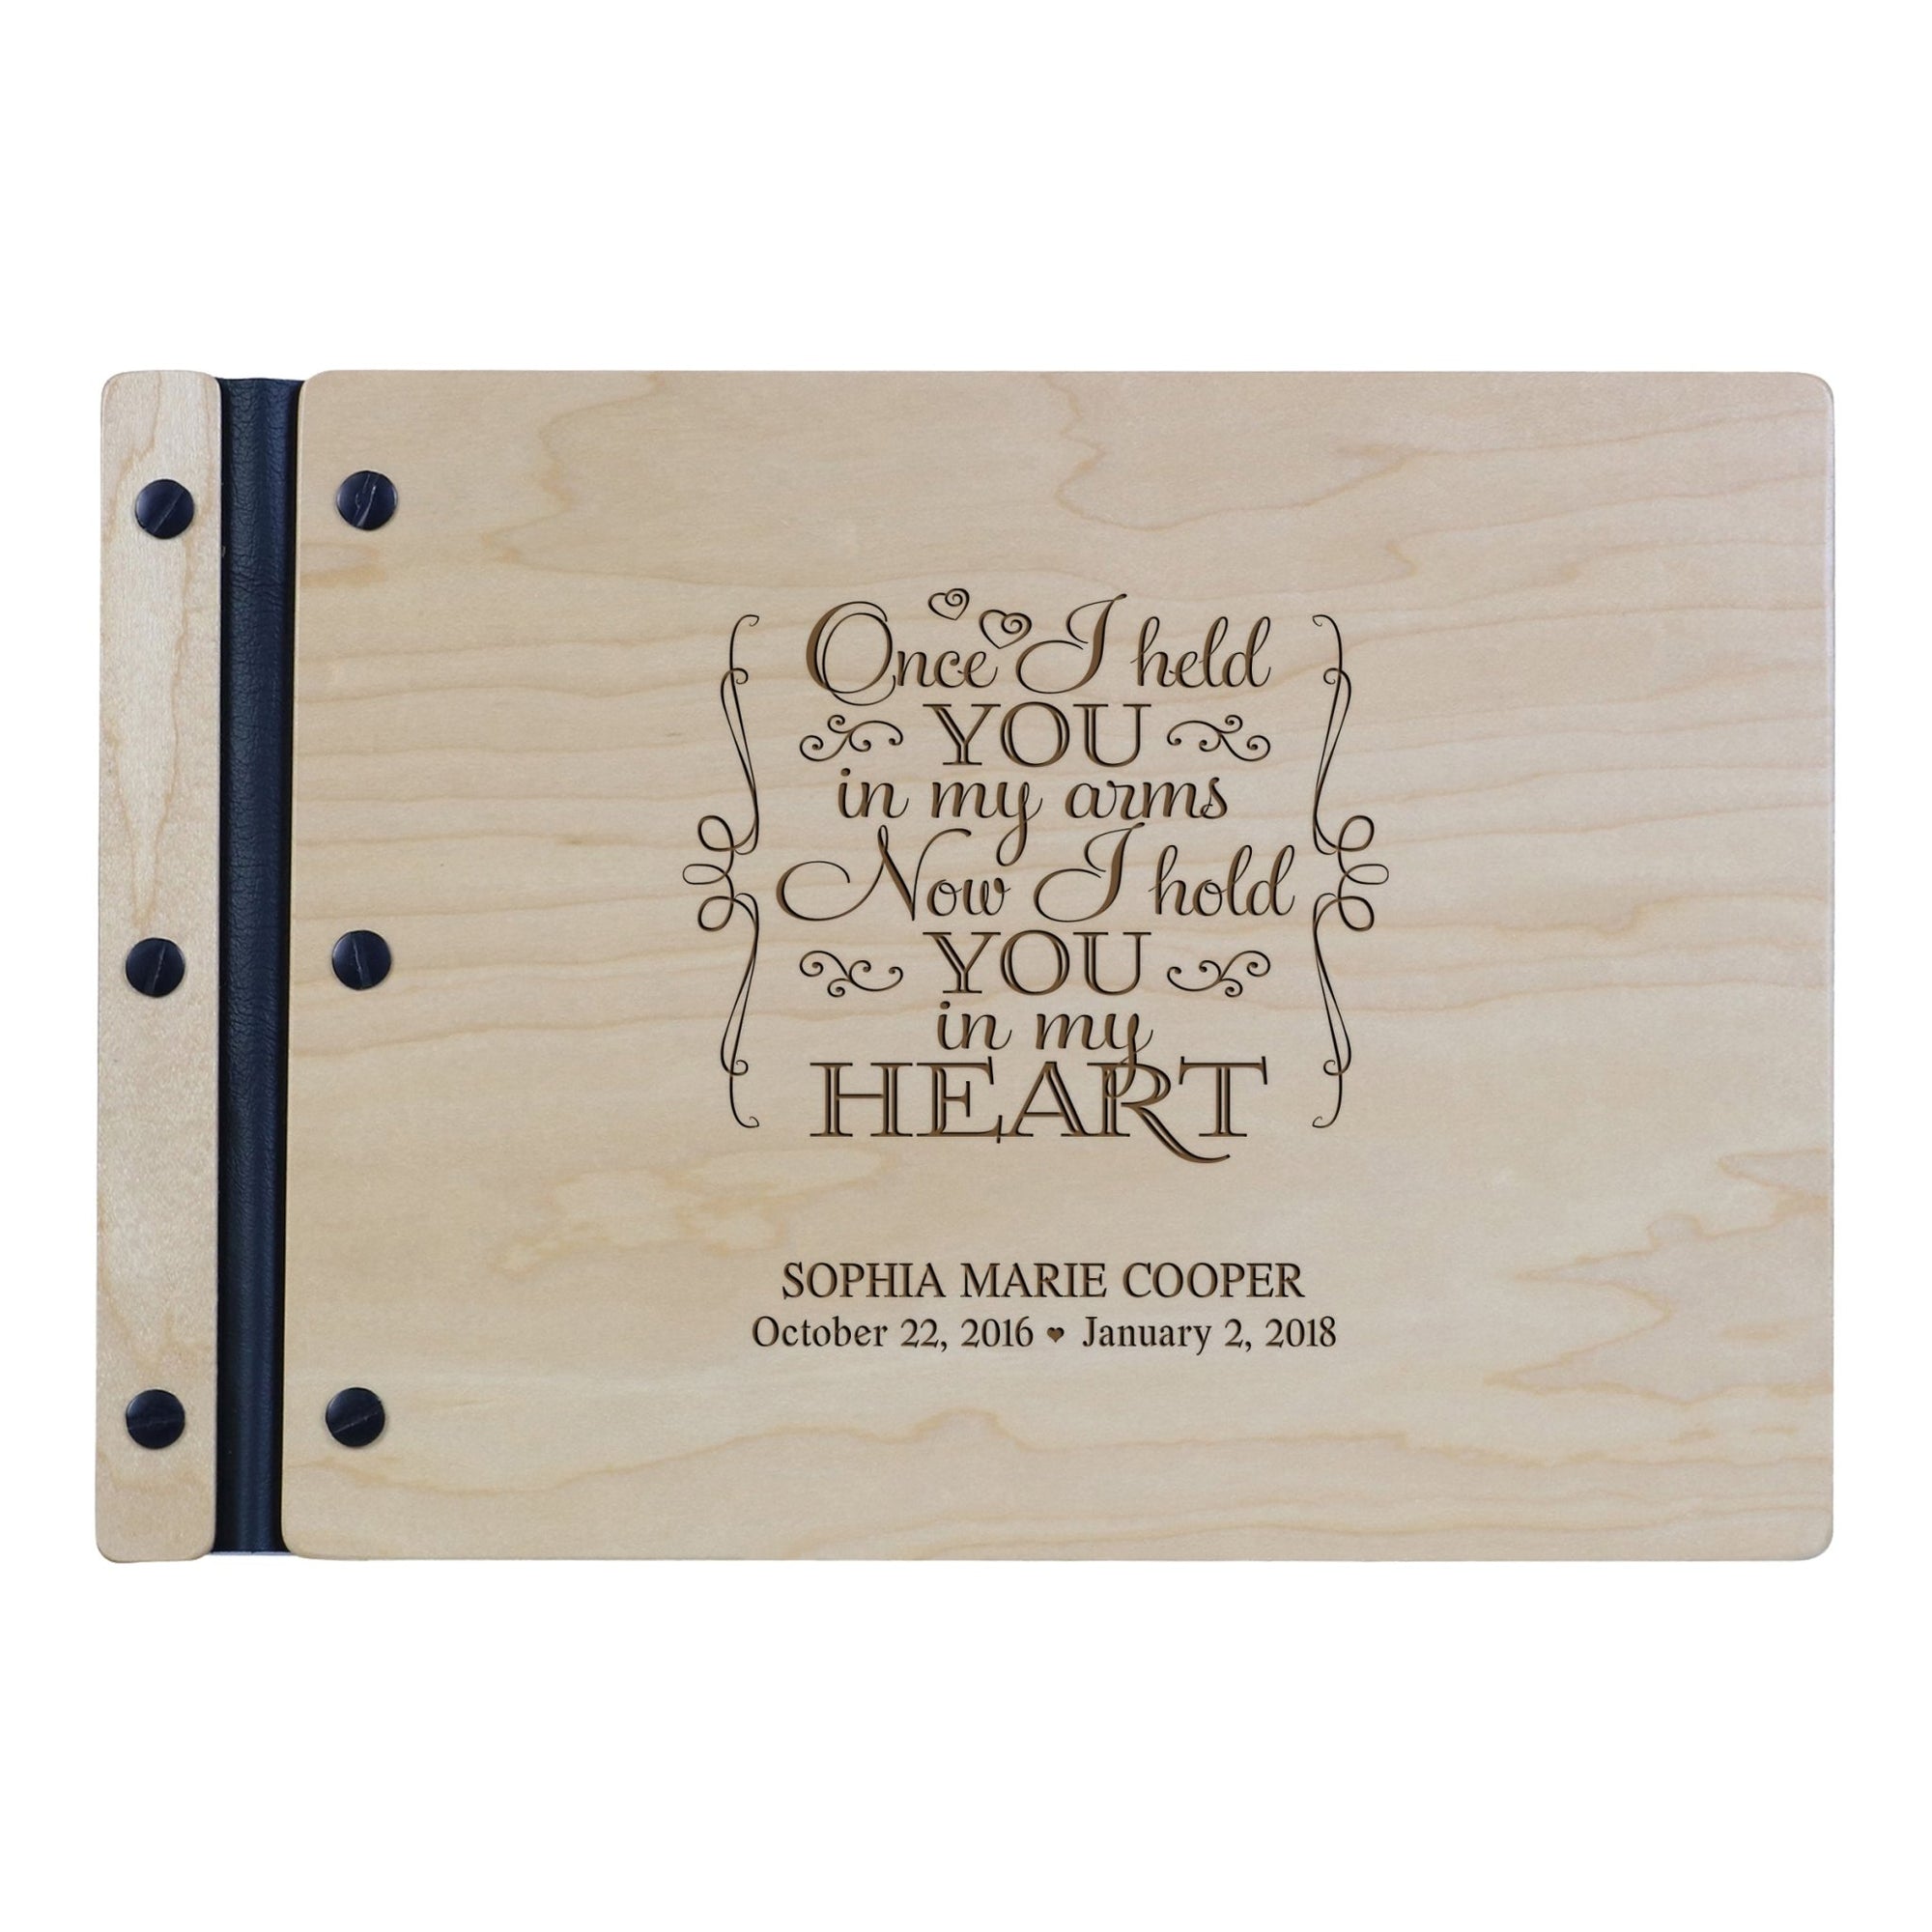 Personalized Memorial Guest Book - Once I Held You - LifeSong Milestones